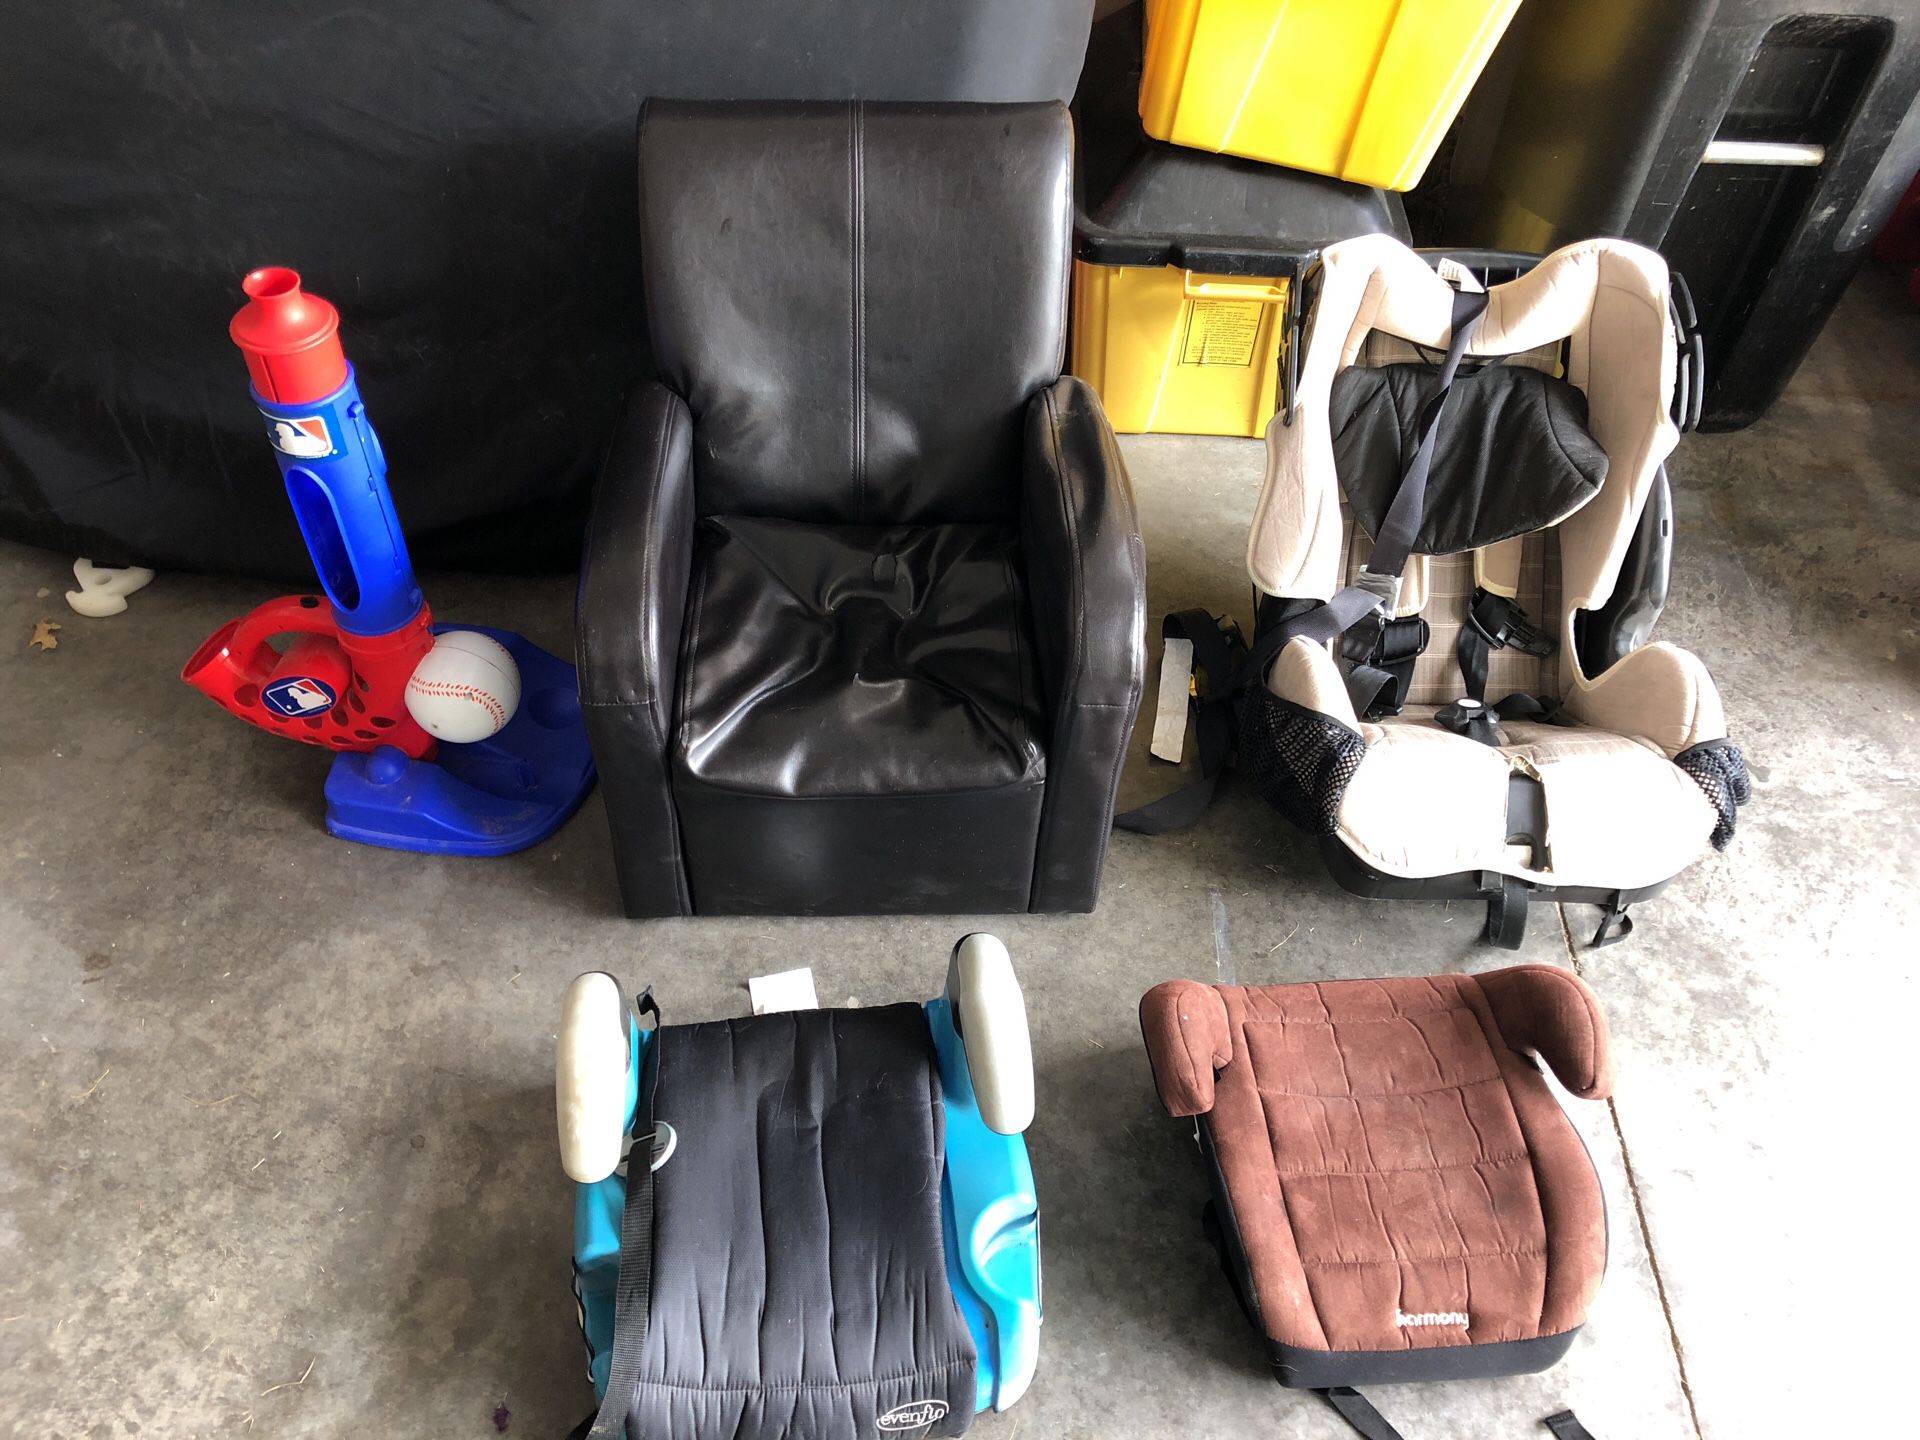 Free- two booster seats, a small child’s chair with a rip, tee for tee all, car seat